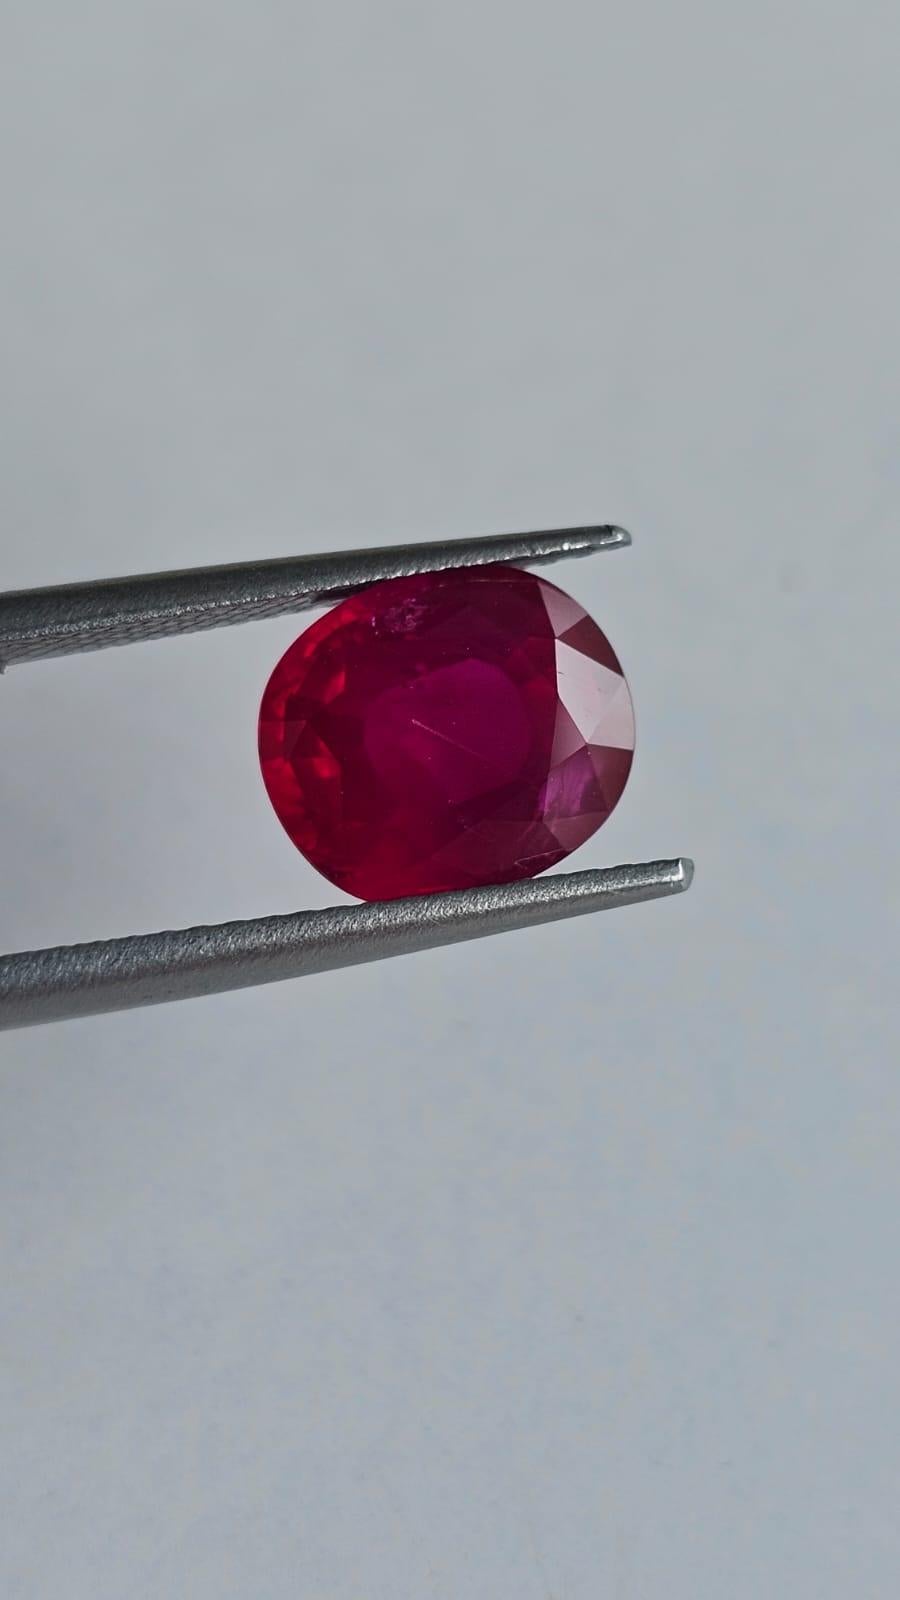 Cushion Cut 3.50 carat 'Pigeons Blood' Red Burmese Ruby - Unheated For Sale